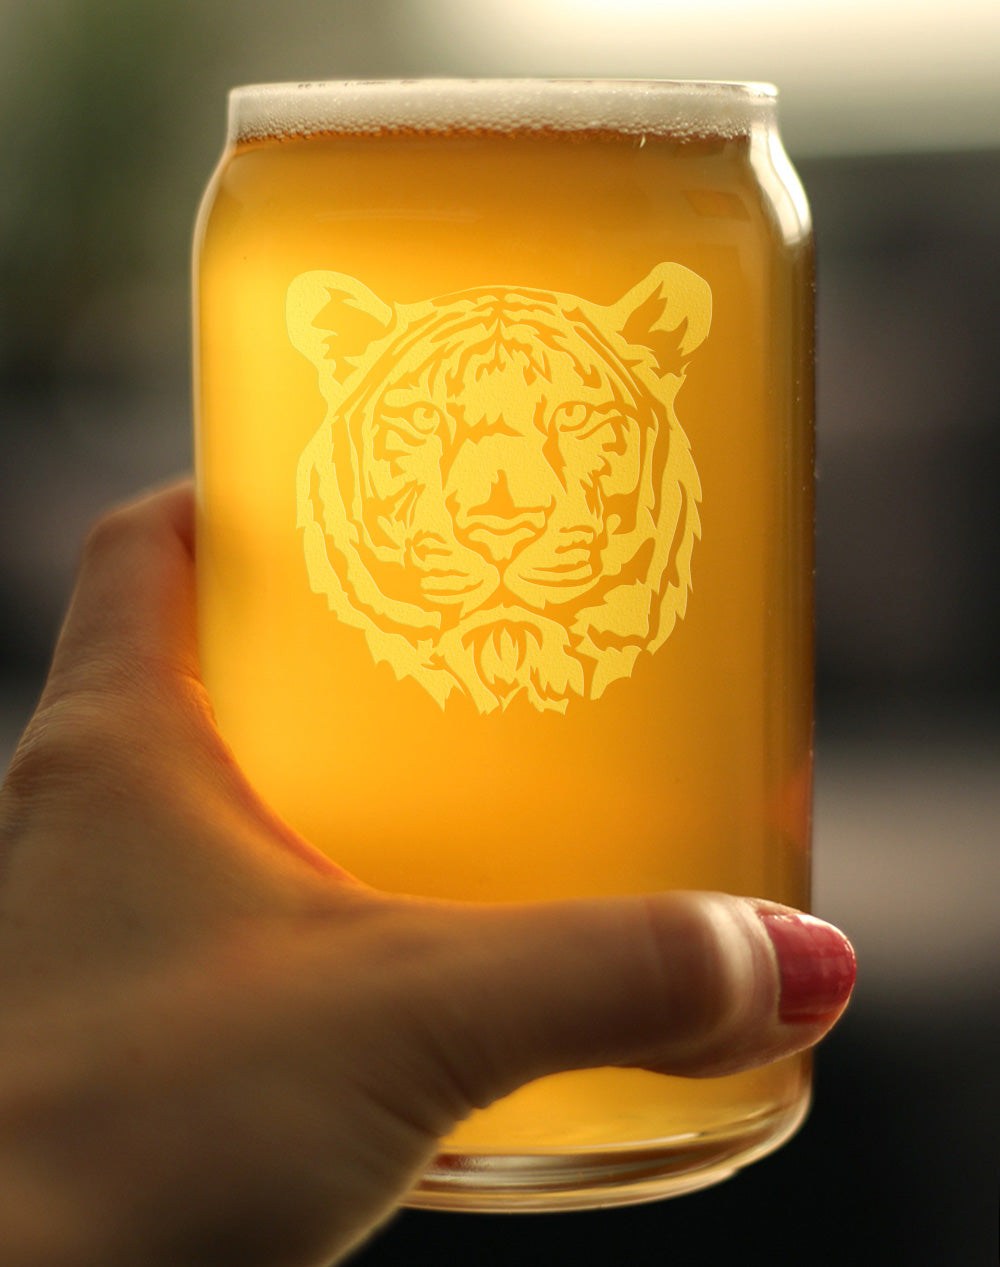 Tiger Face Beer Can Pint Glass - Unique Tiger Themed Decor and Gifts for Animal Lovers - 16 Oz Glasses